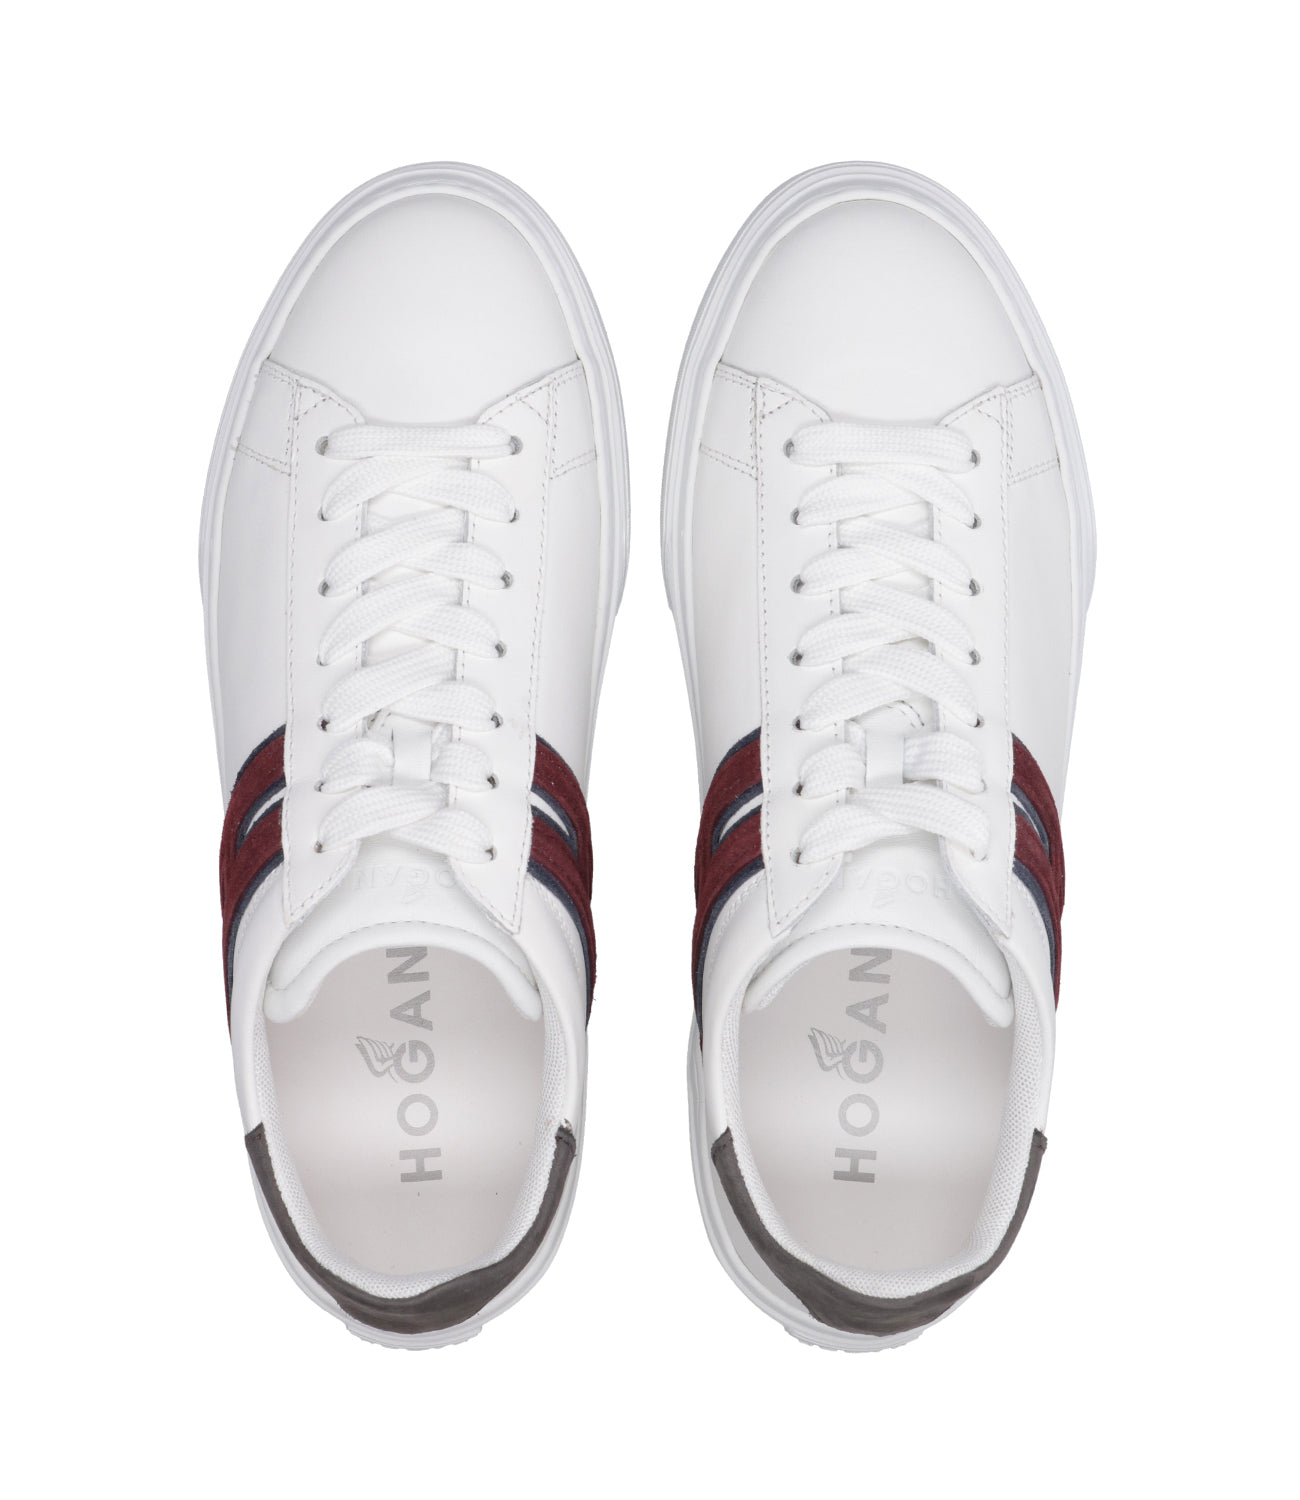 Hogan | Sneakers H365 Lace-up H Canaletto White and Bordeaux